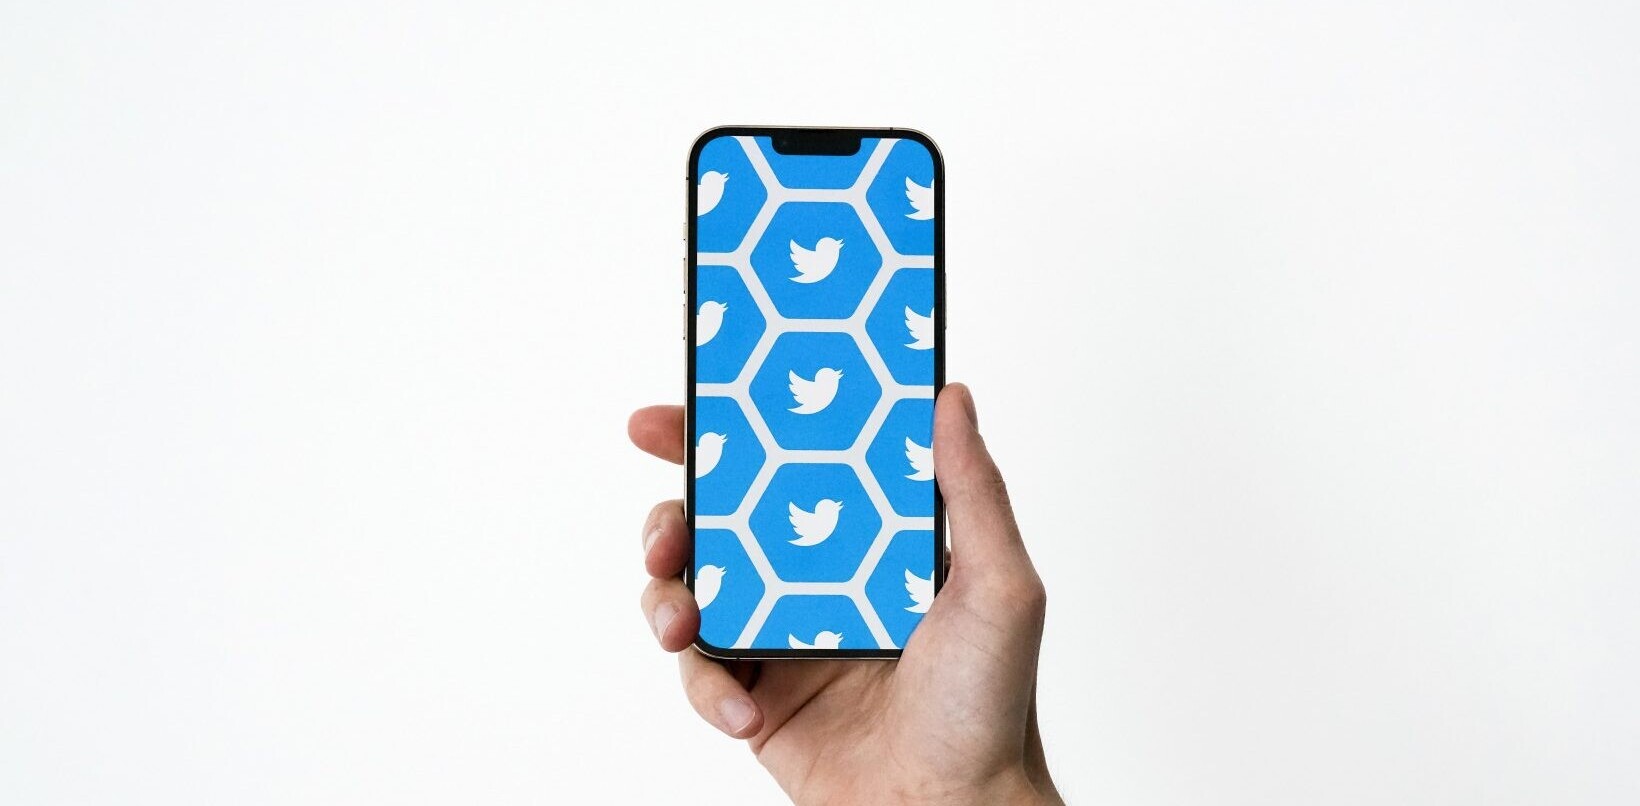 Twitter wants to bring the spotlight back to third-party apps — and win over developers